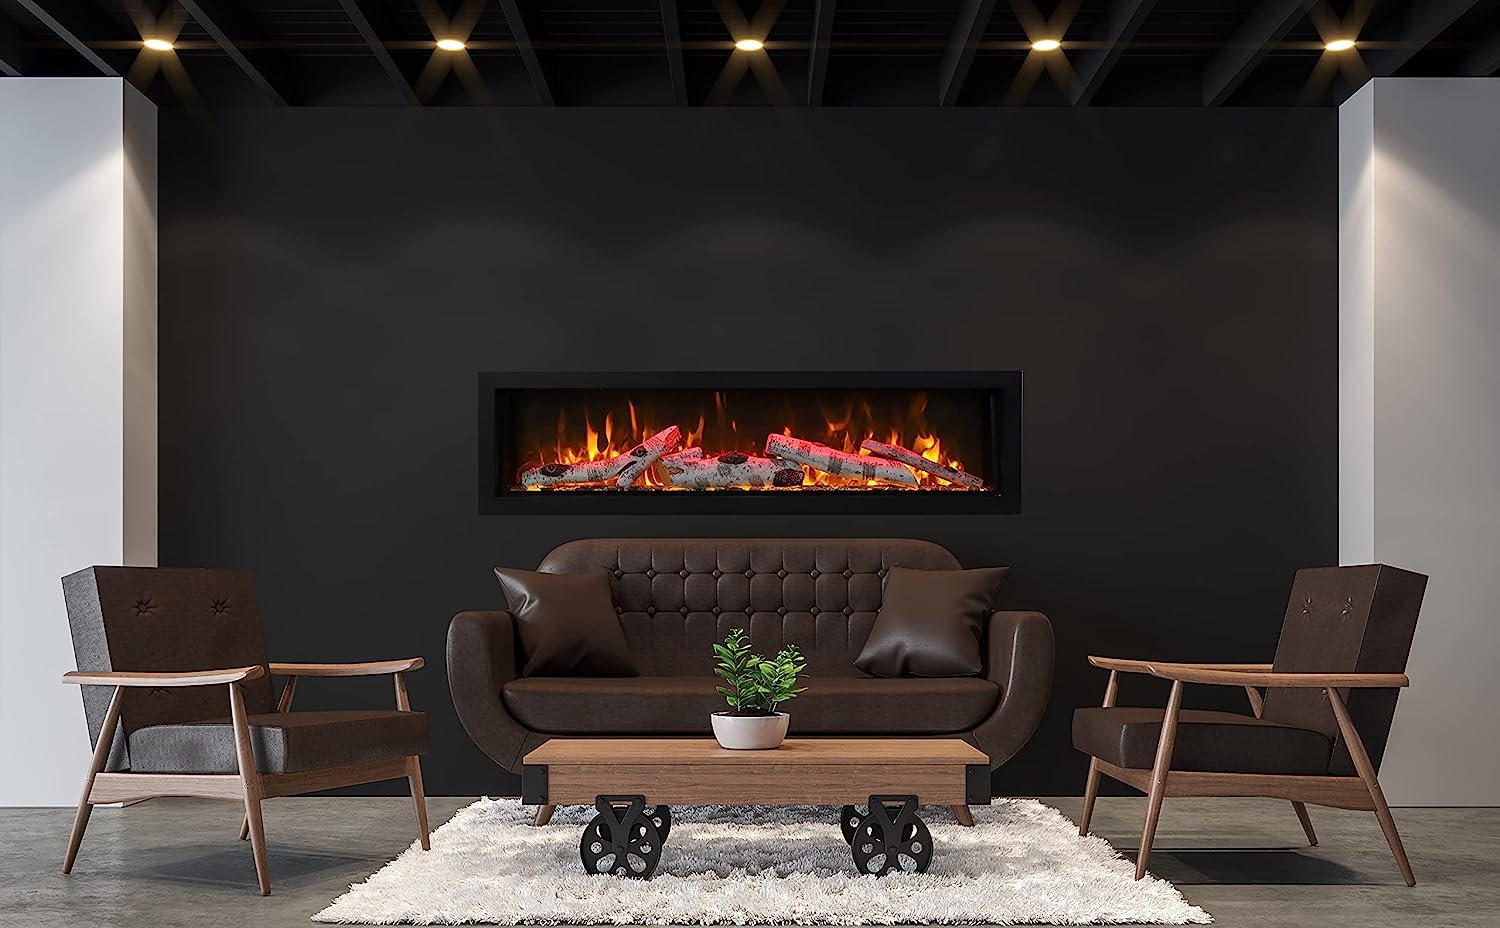 Amantii 88" Symmetry 3.0 Built-in Smart WiFi Electric Fireplace -SYM-88- Lifestyle Living Room Black Wall Fireplace